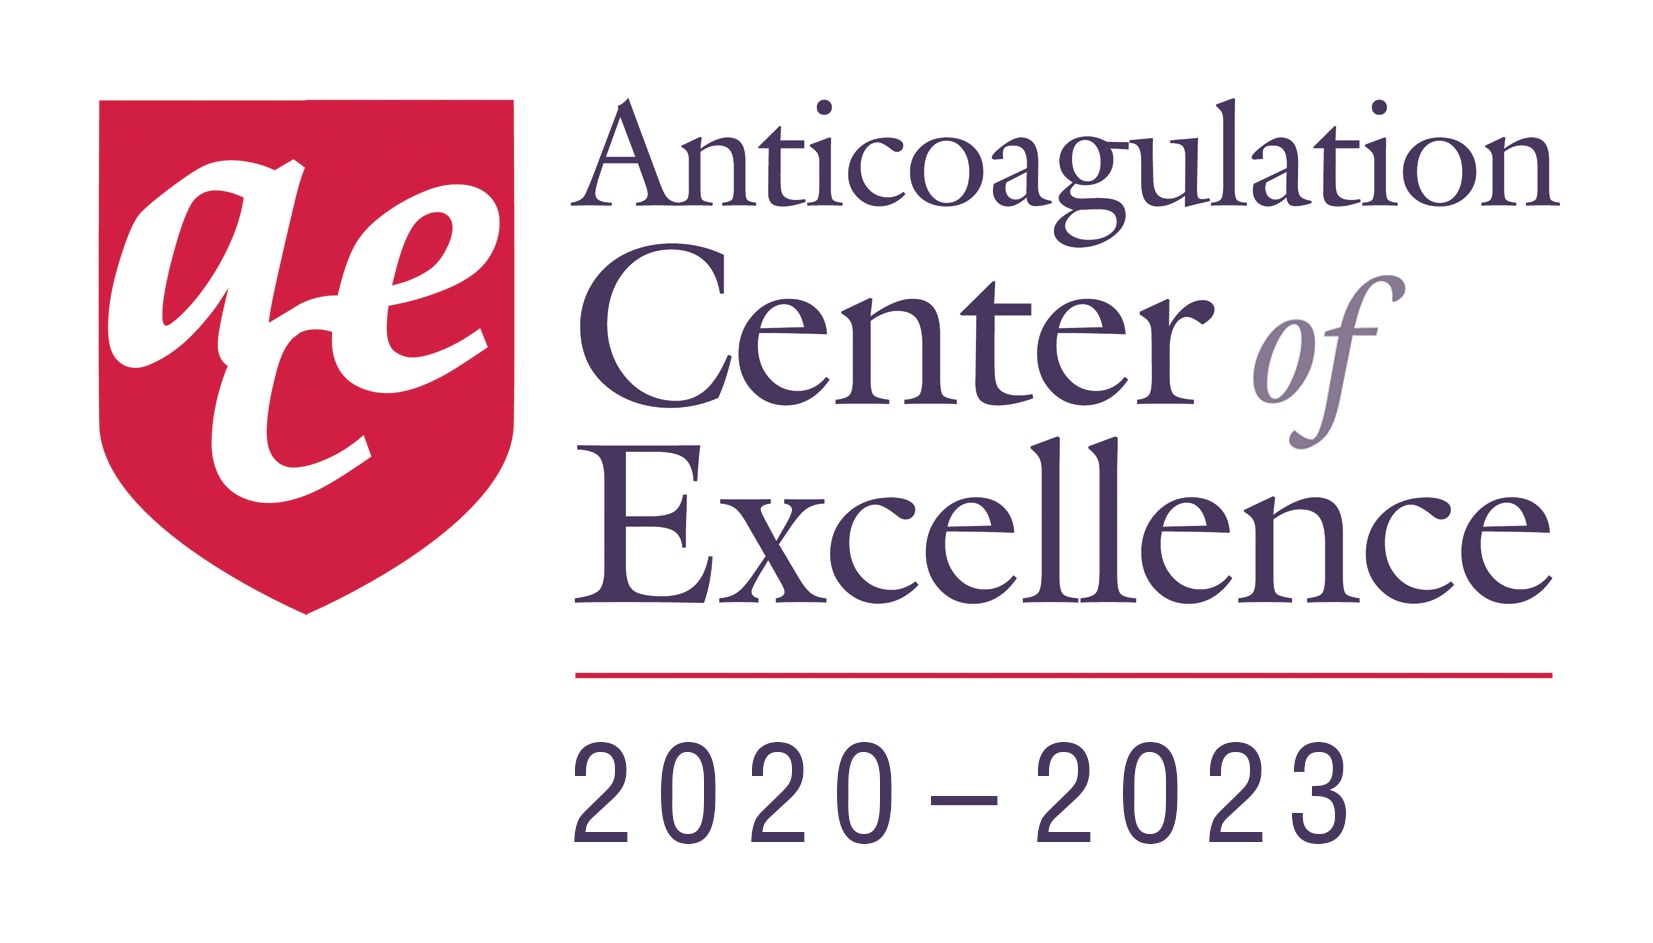 Picture of Anticoagulation Center of Excellence in 2020-2023 badge logo